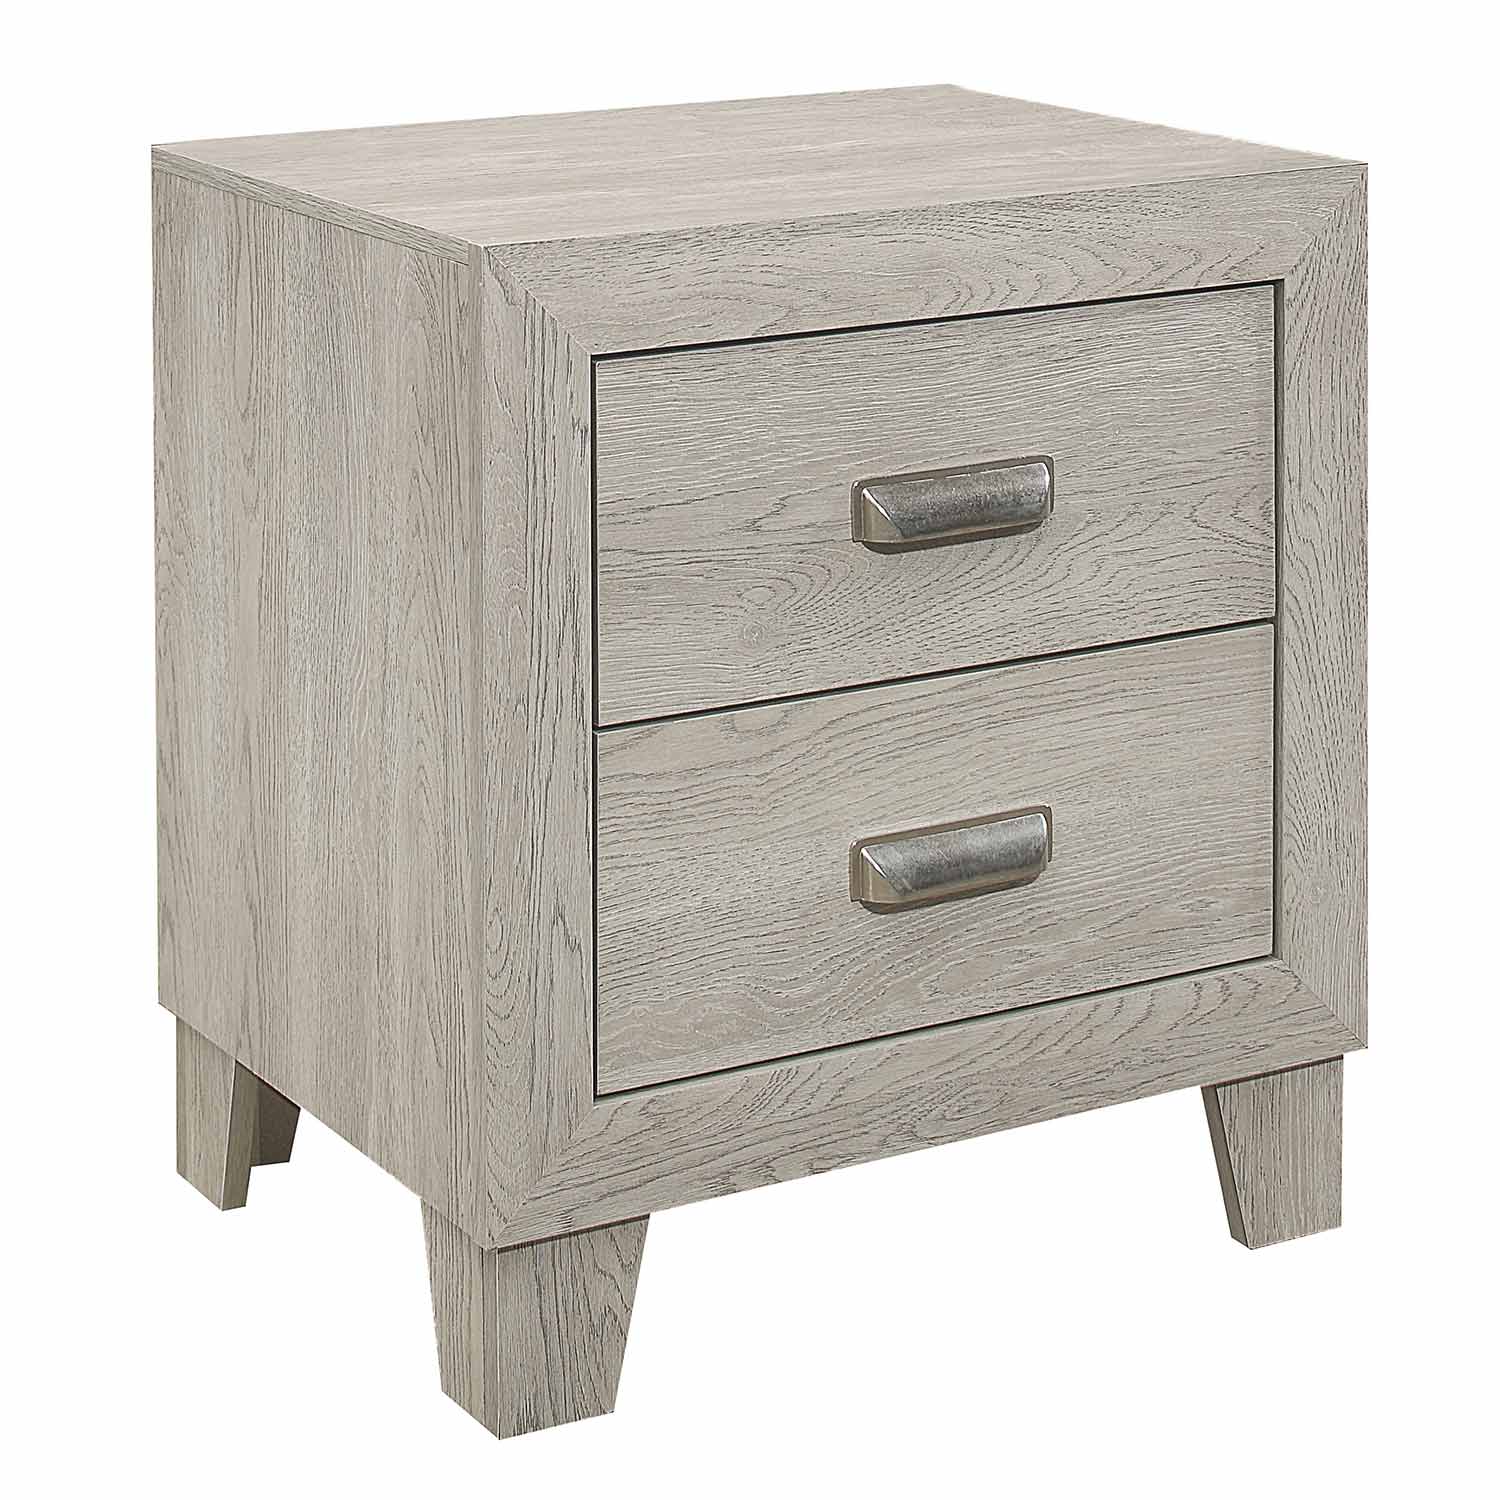 Homelegance Quinby Night Stand - Light Gray